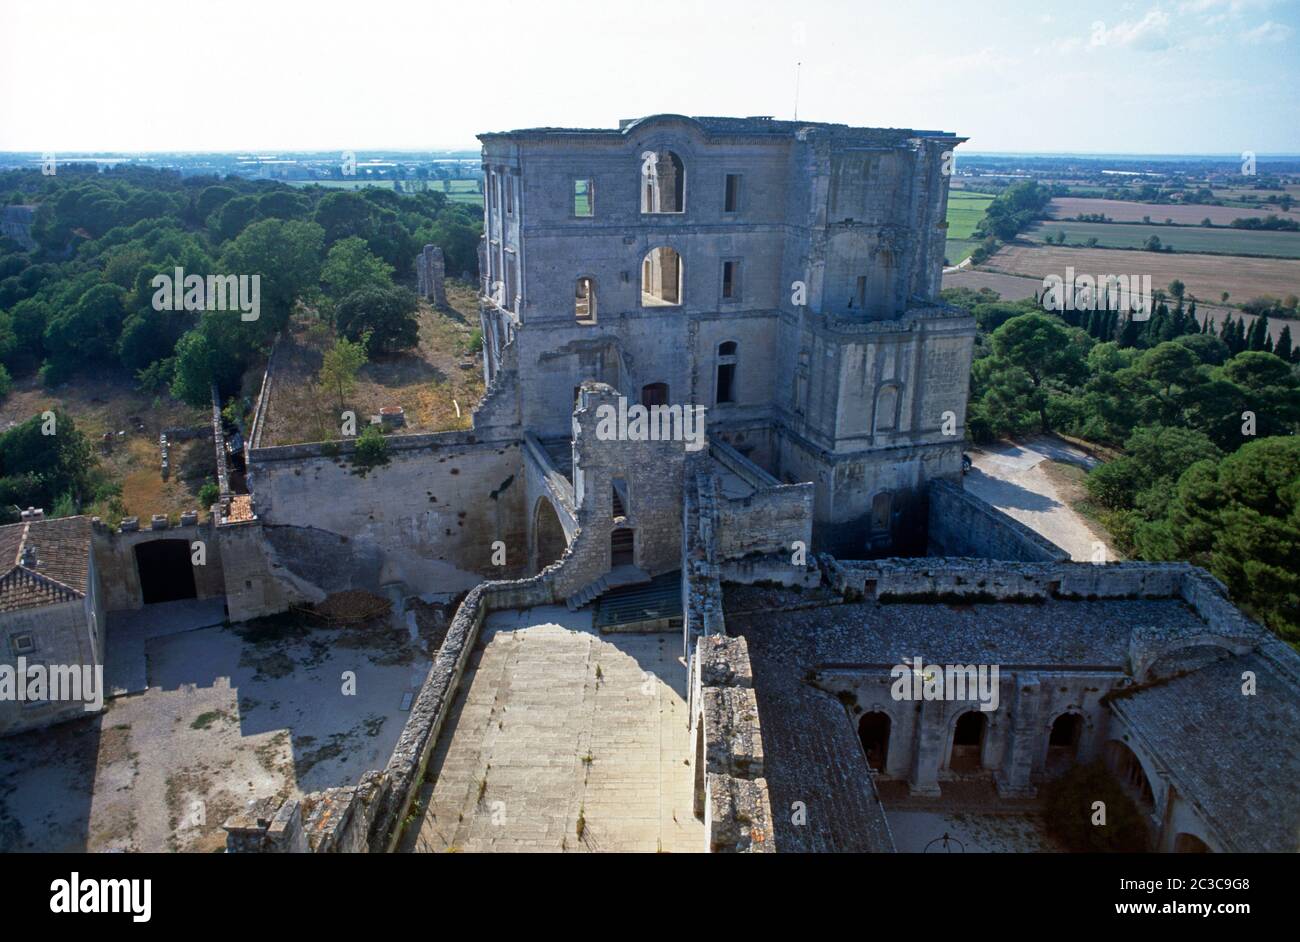 Provence France Abbaye de Montmajour Overview Of The Cloisters And Ruins Of The Maurist Monastery Stock Photo